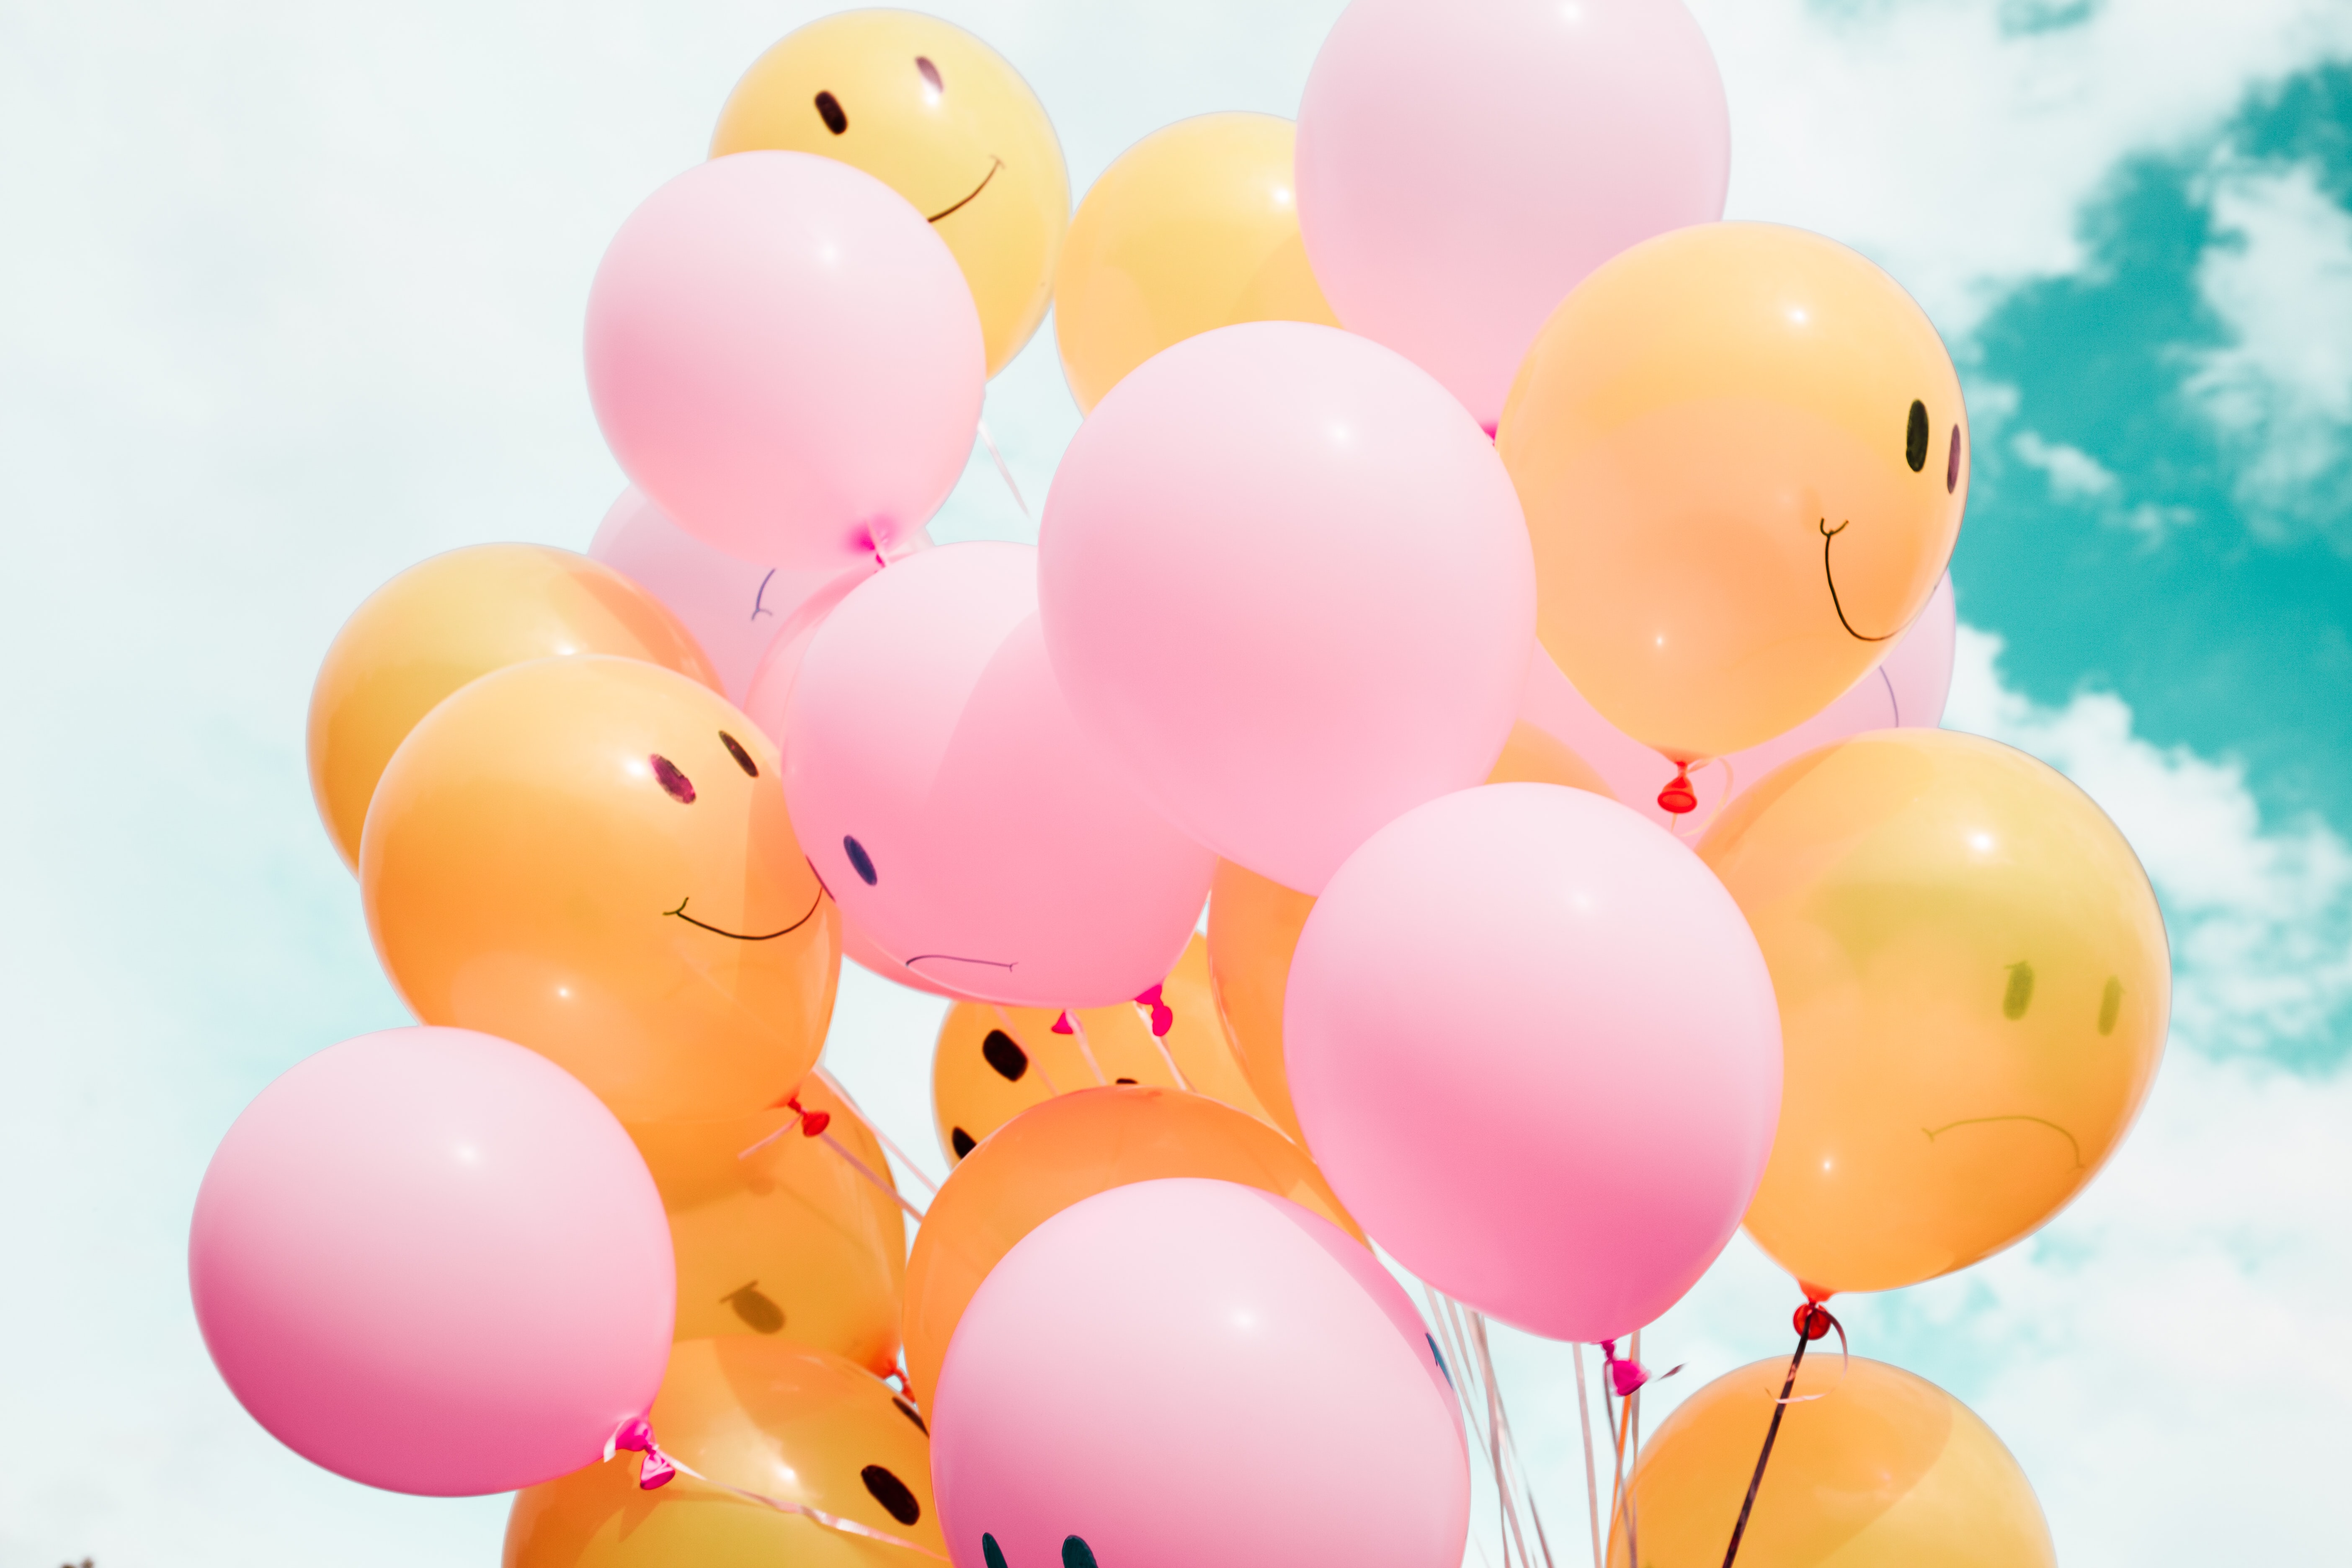 A bunch of yellow and pink balloons with happy and sad faces